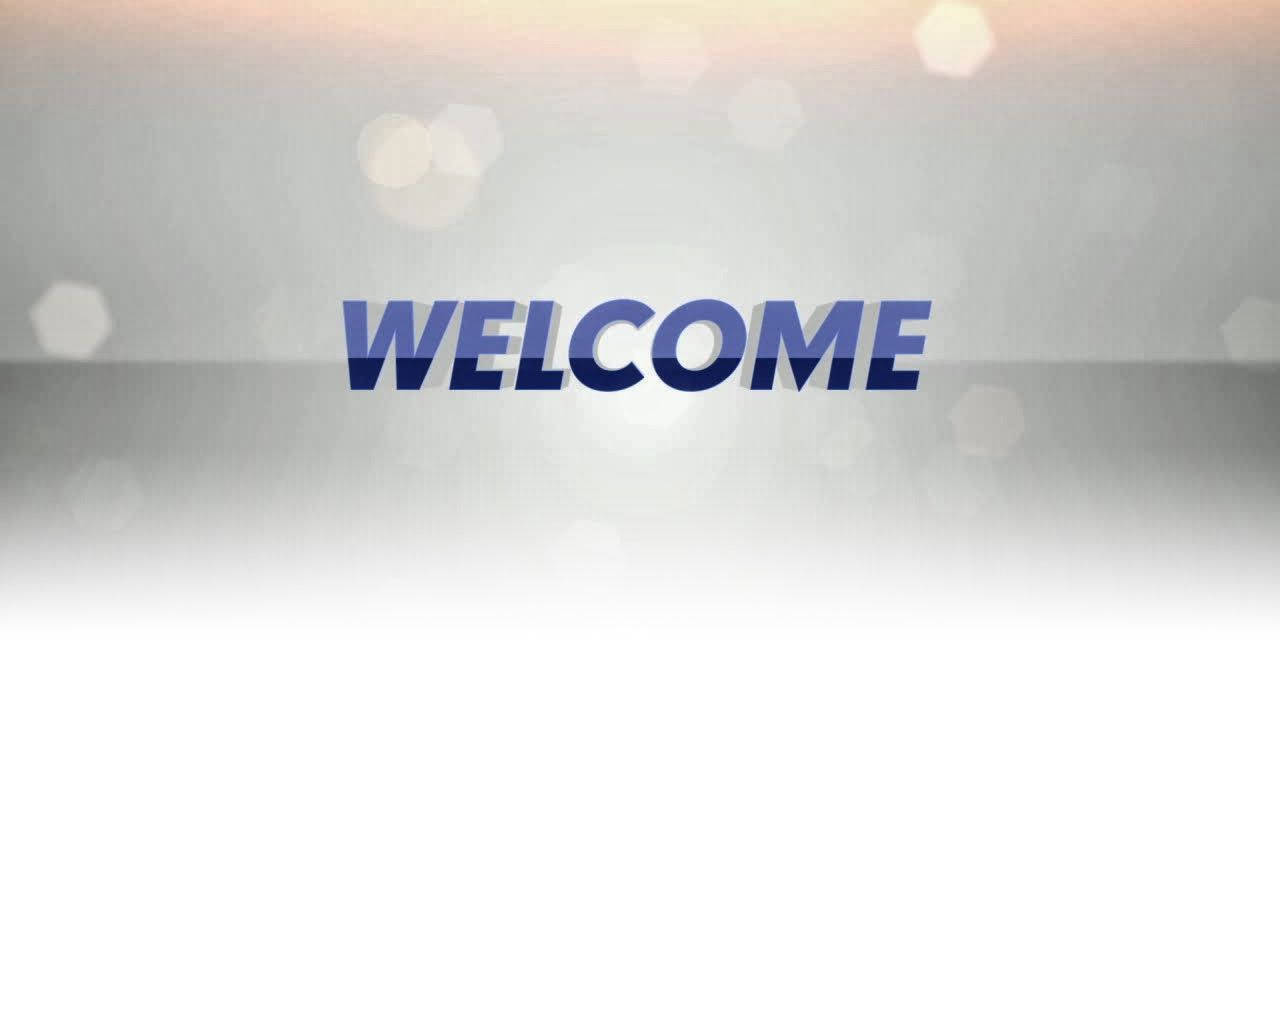 Warm Welcome on a Blue Duotone Background Wallpaper